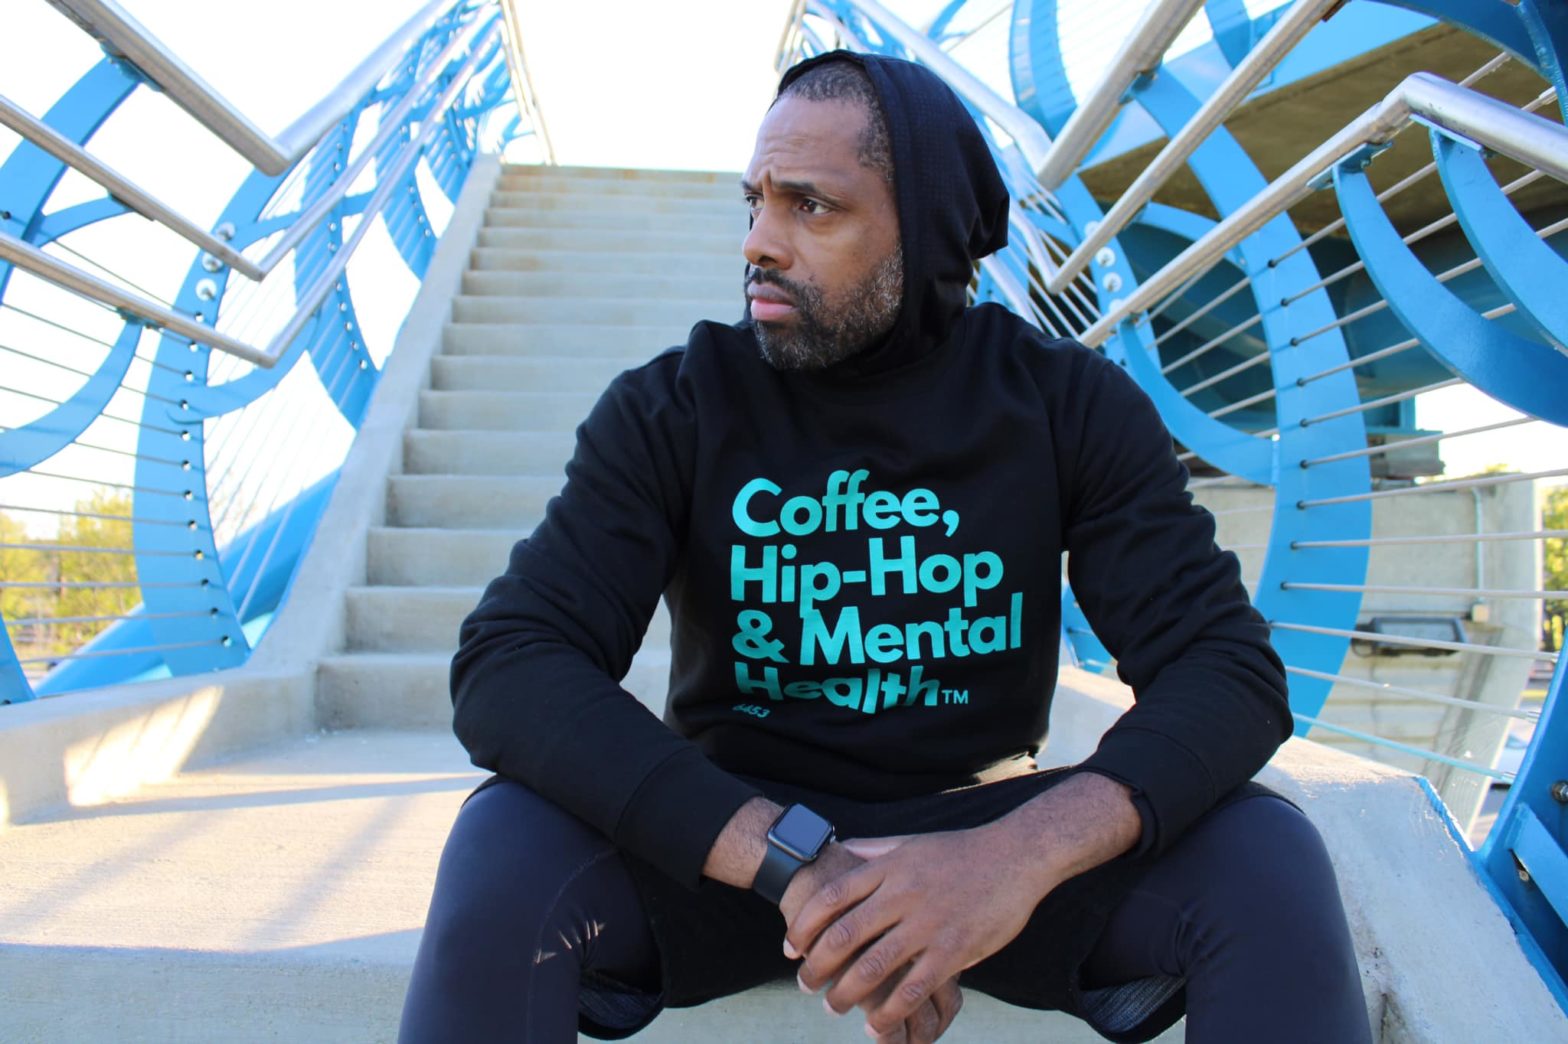 Coffee, Hip-Hop and Mental Health: The Chicago Shop Serving Therapy With Each Cup